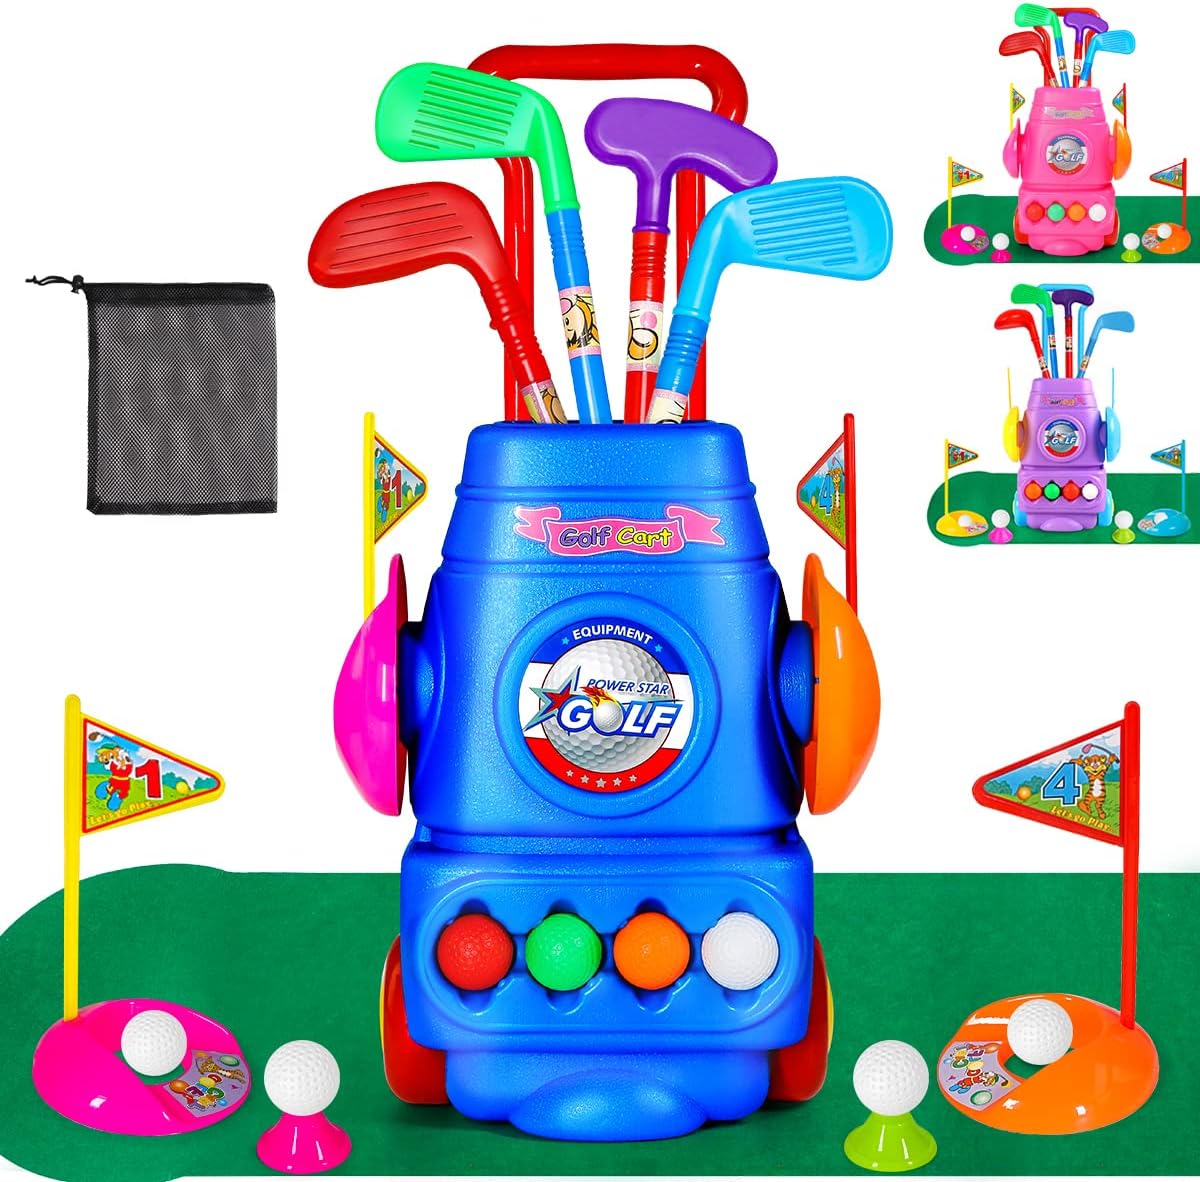 Meland Kids Golf Club Set - Toddler Golf Ball Game Play Set Sports Outdoor Toys Birthday Gifts for Boys Girls 3 4 5 6 Year Old (Blue) : Toys  Games